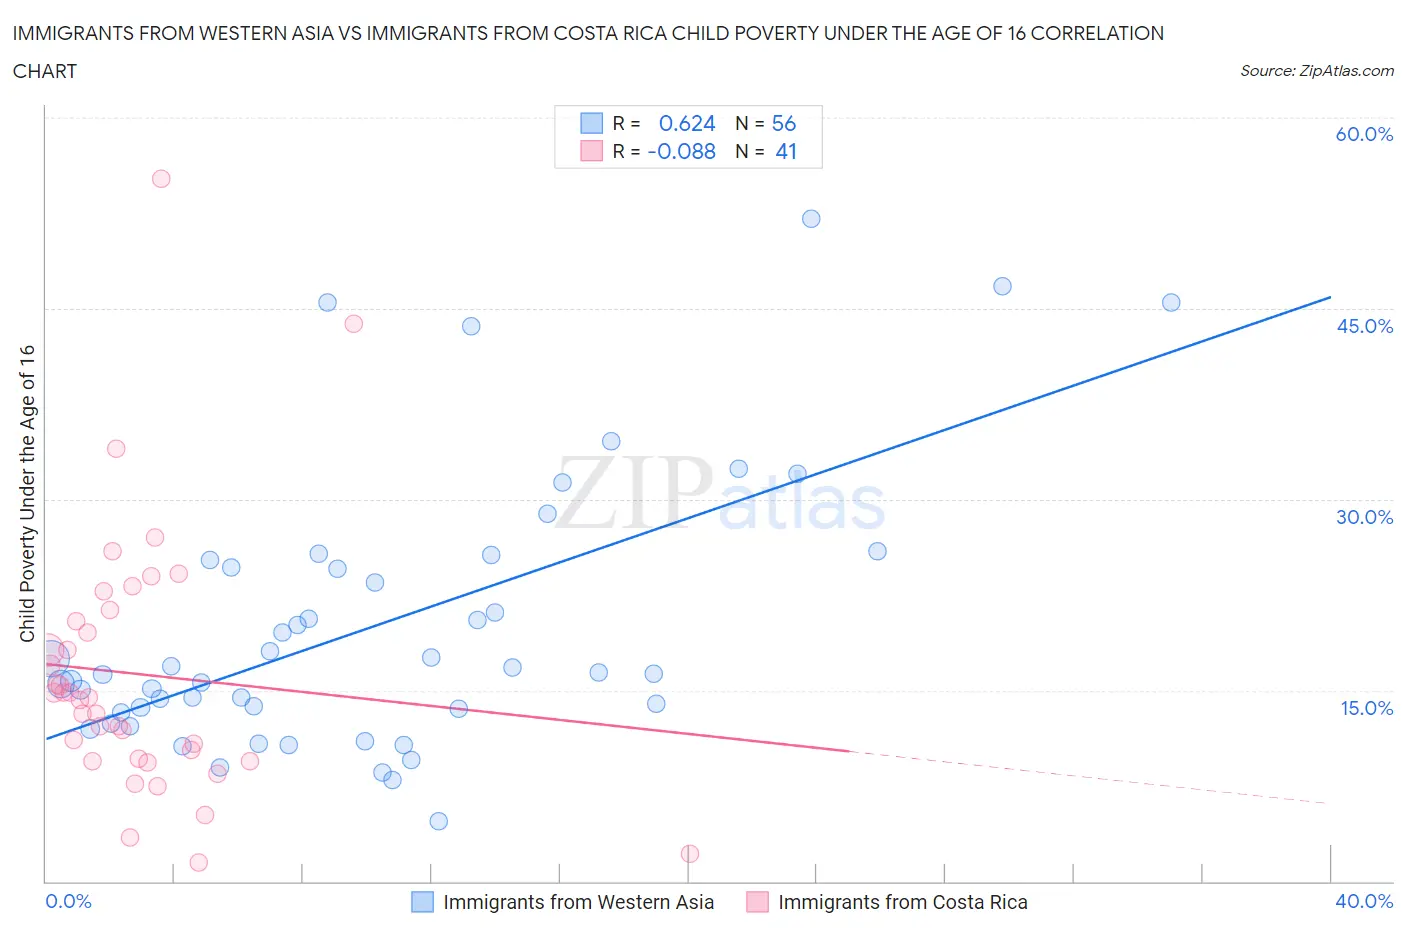 Immigrants from Western Asia vs Immigrants from Costa Rica Child Poverty Under the Age of 16